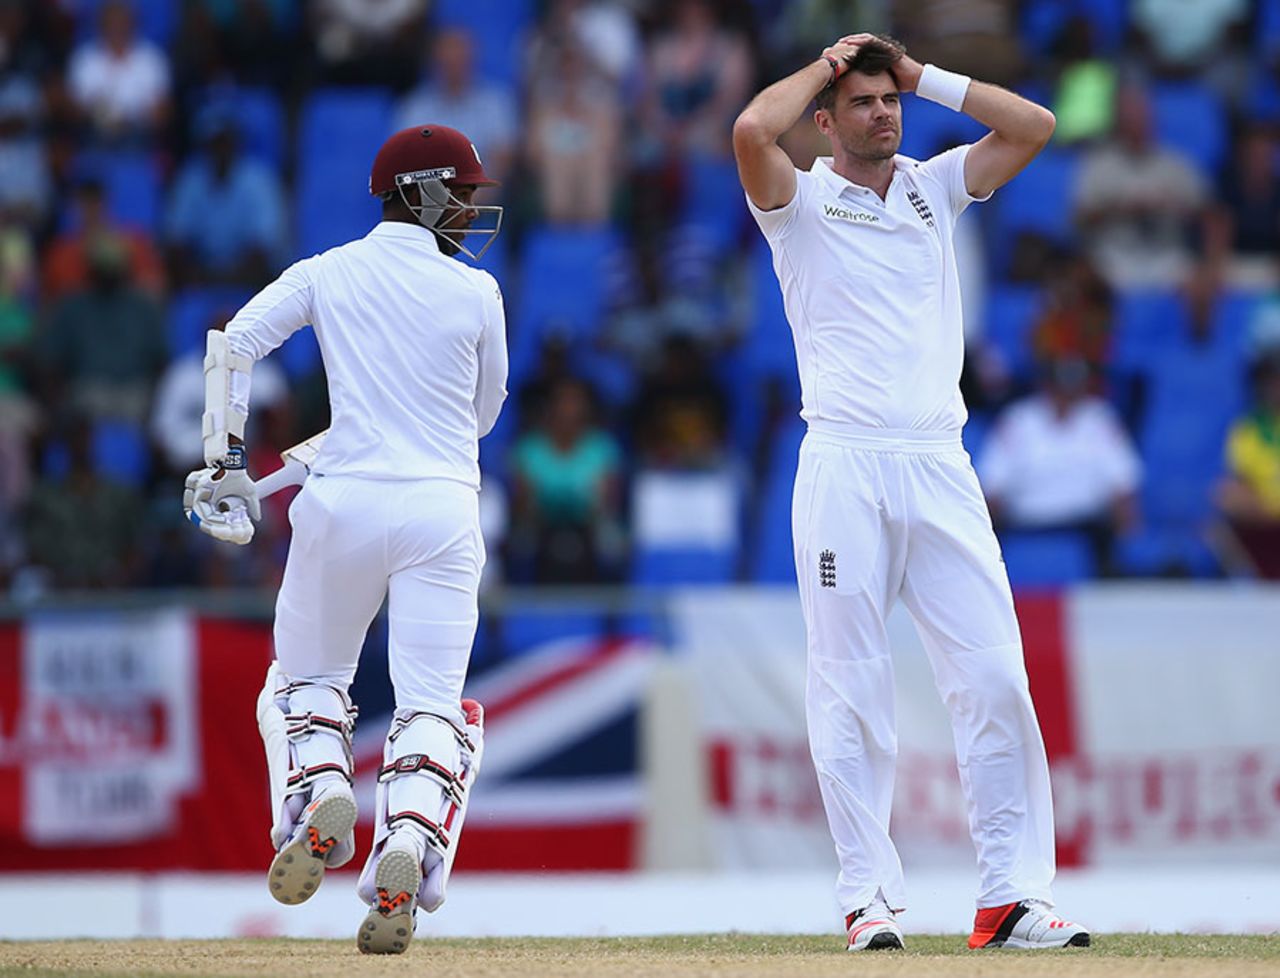 James Anderson produced an edge from Denesh Ramdin but it shot past gully, West Indies v England, 1st Test, North Sound, 5th day, April 17, 2015